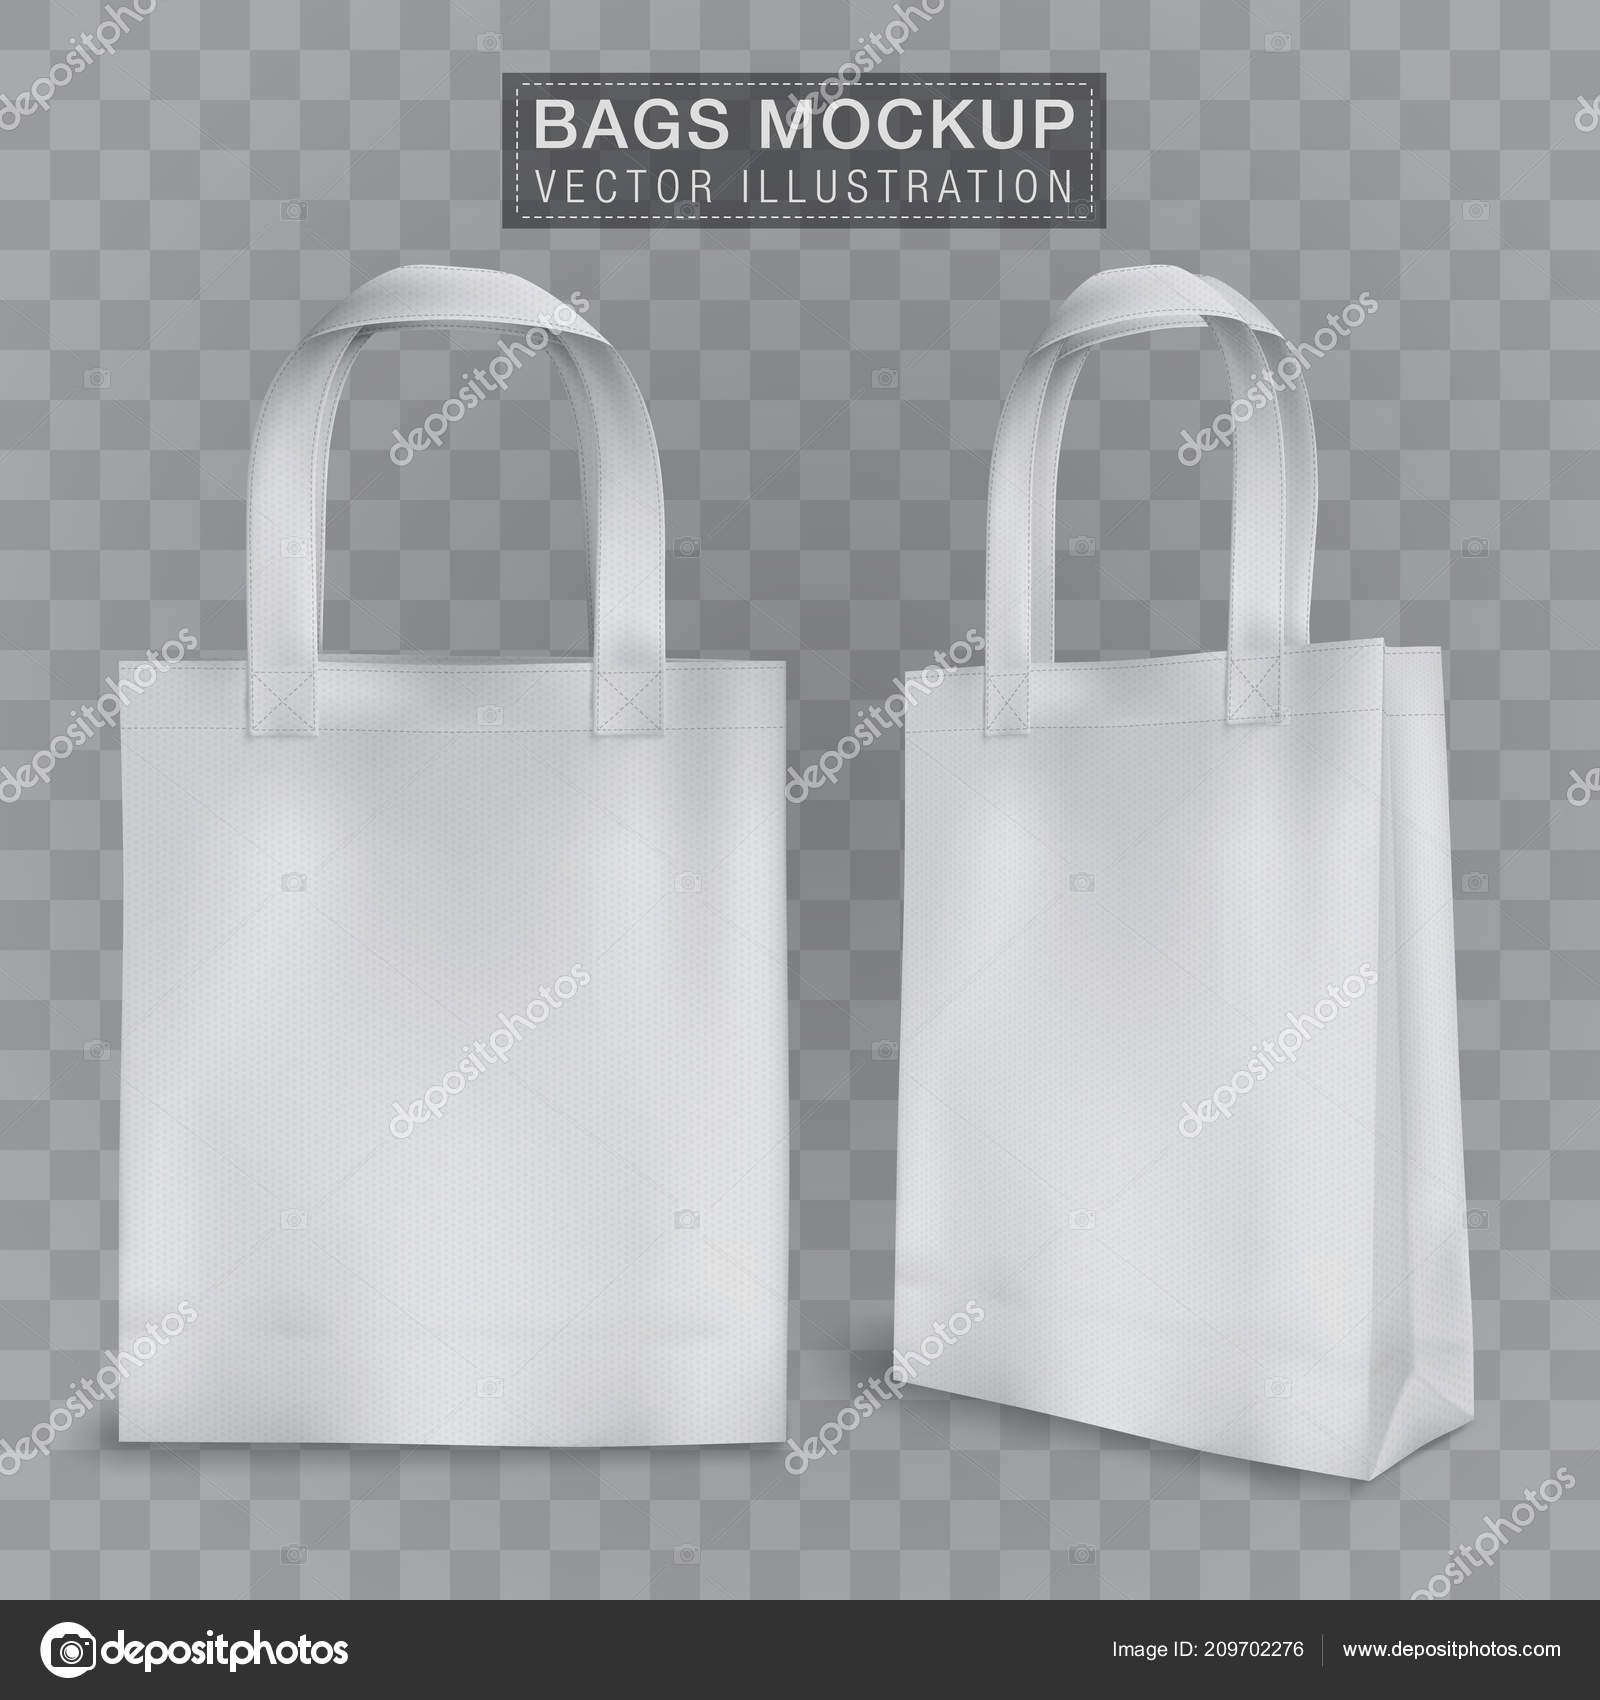 Shopping RPET bag cotton, Black and white tote shopping bags identity  mock-up items template transparent background. Stock Vector by  ©OlenaShevchenko 464066750